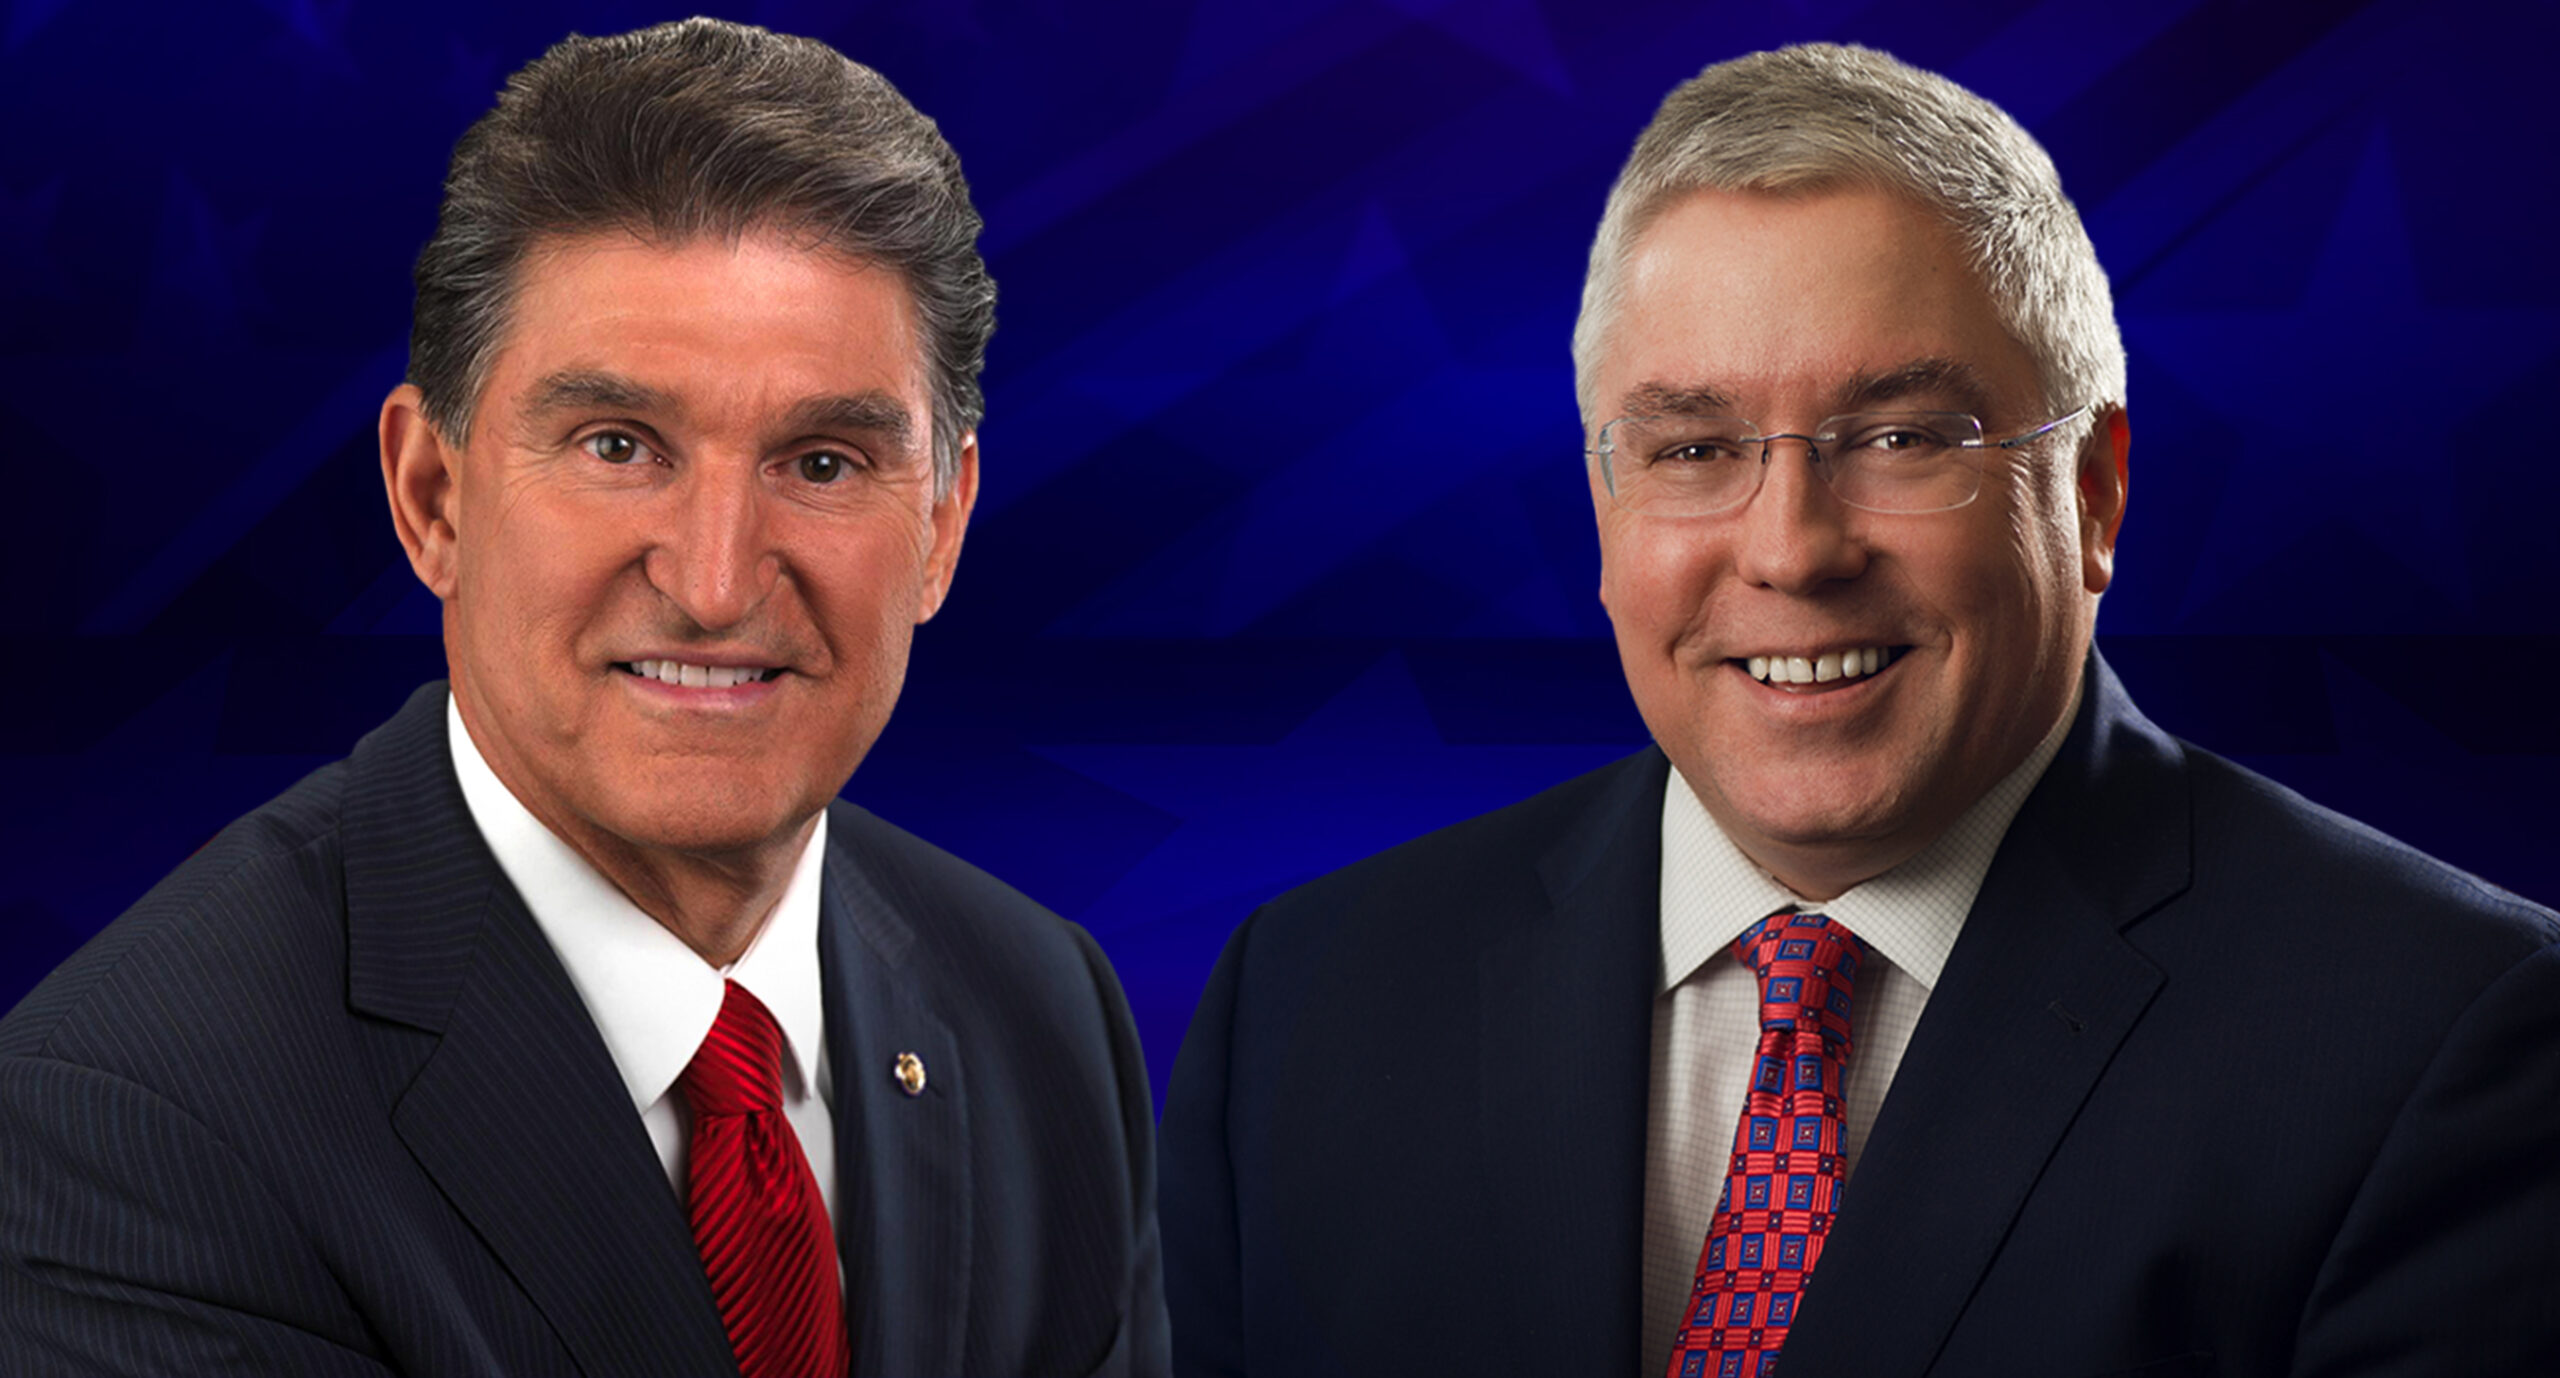 Sources: Manchin is being encouraged to hop into governor's race against Morrisey – WV MetroNews